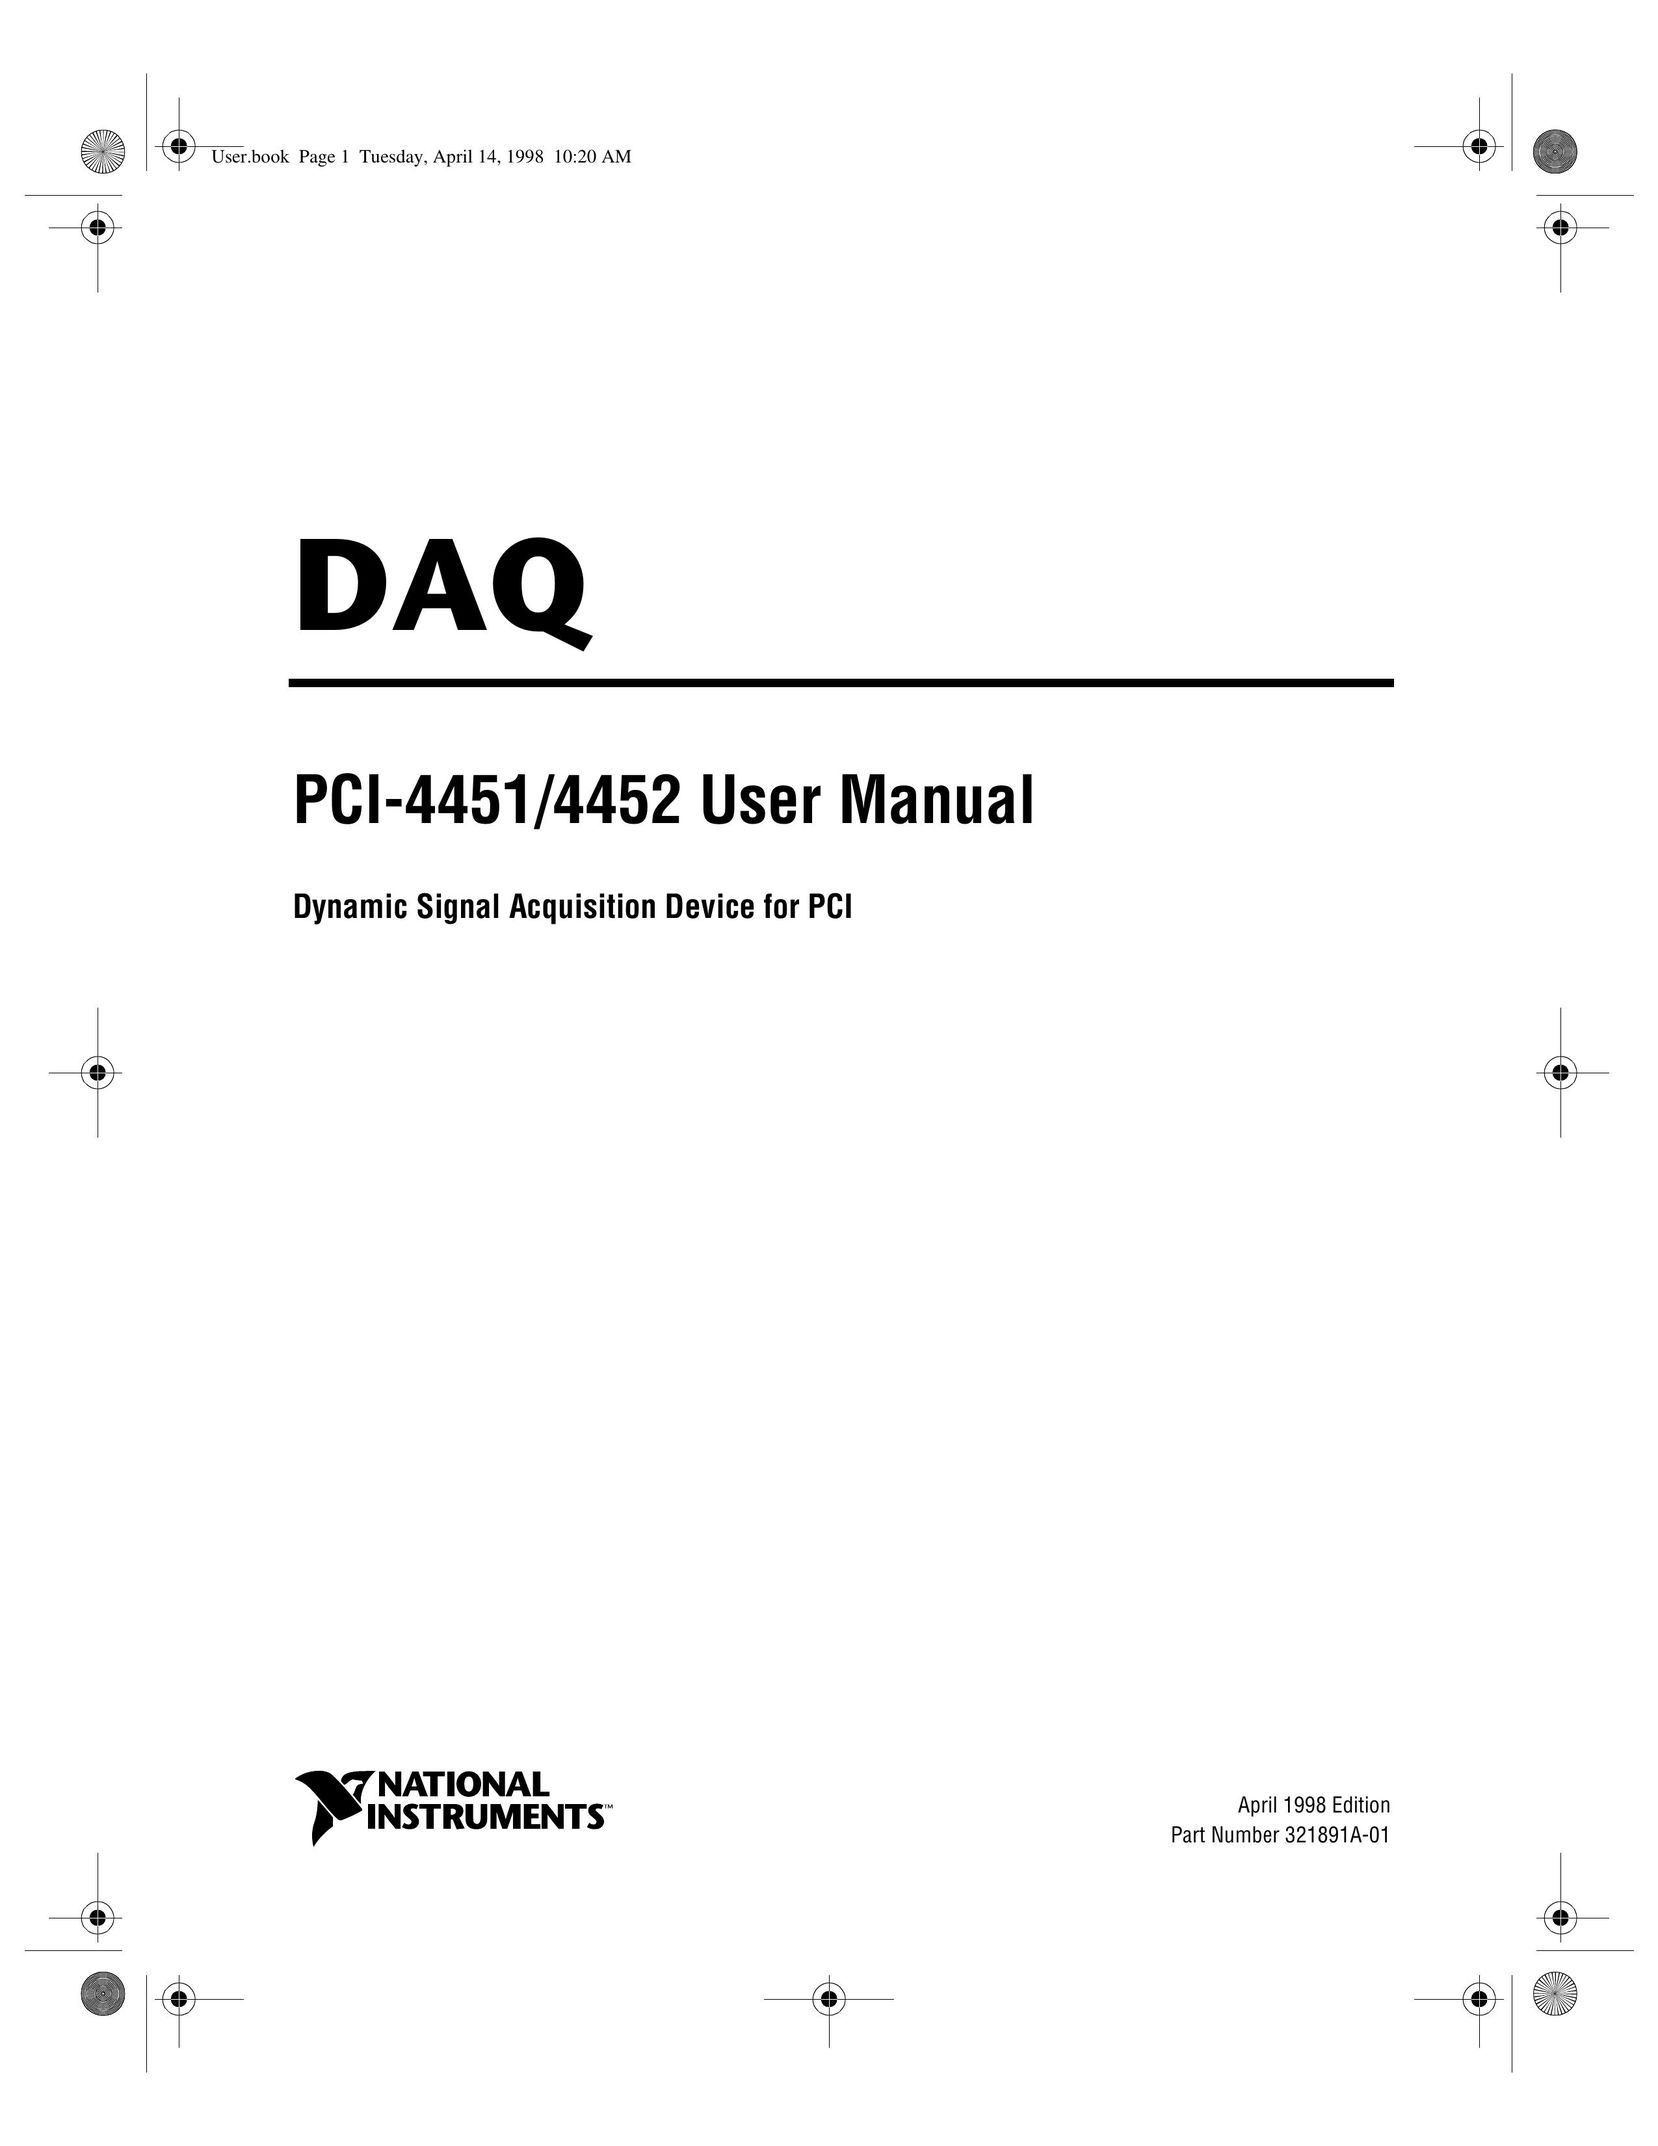 National Instruments PCI-4452 Switch User Manual